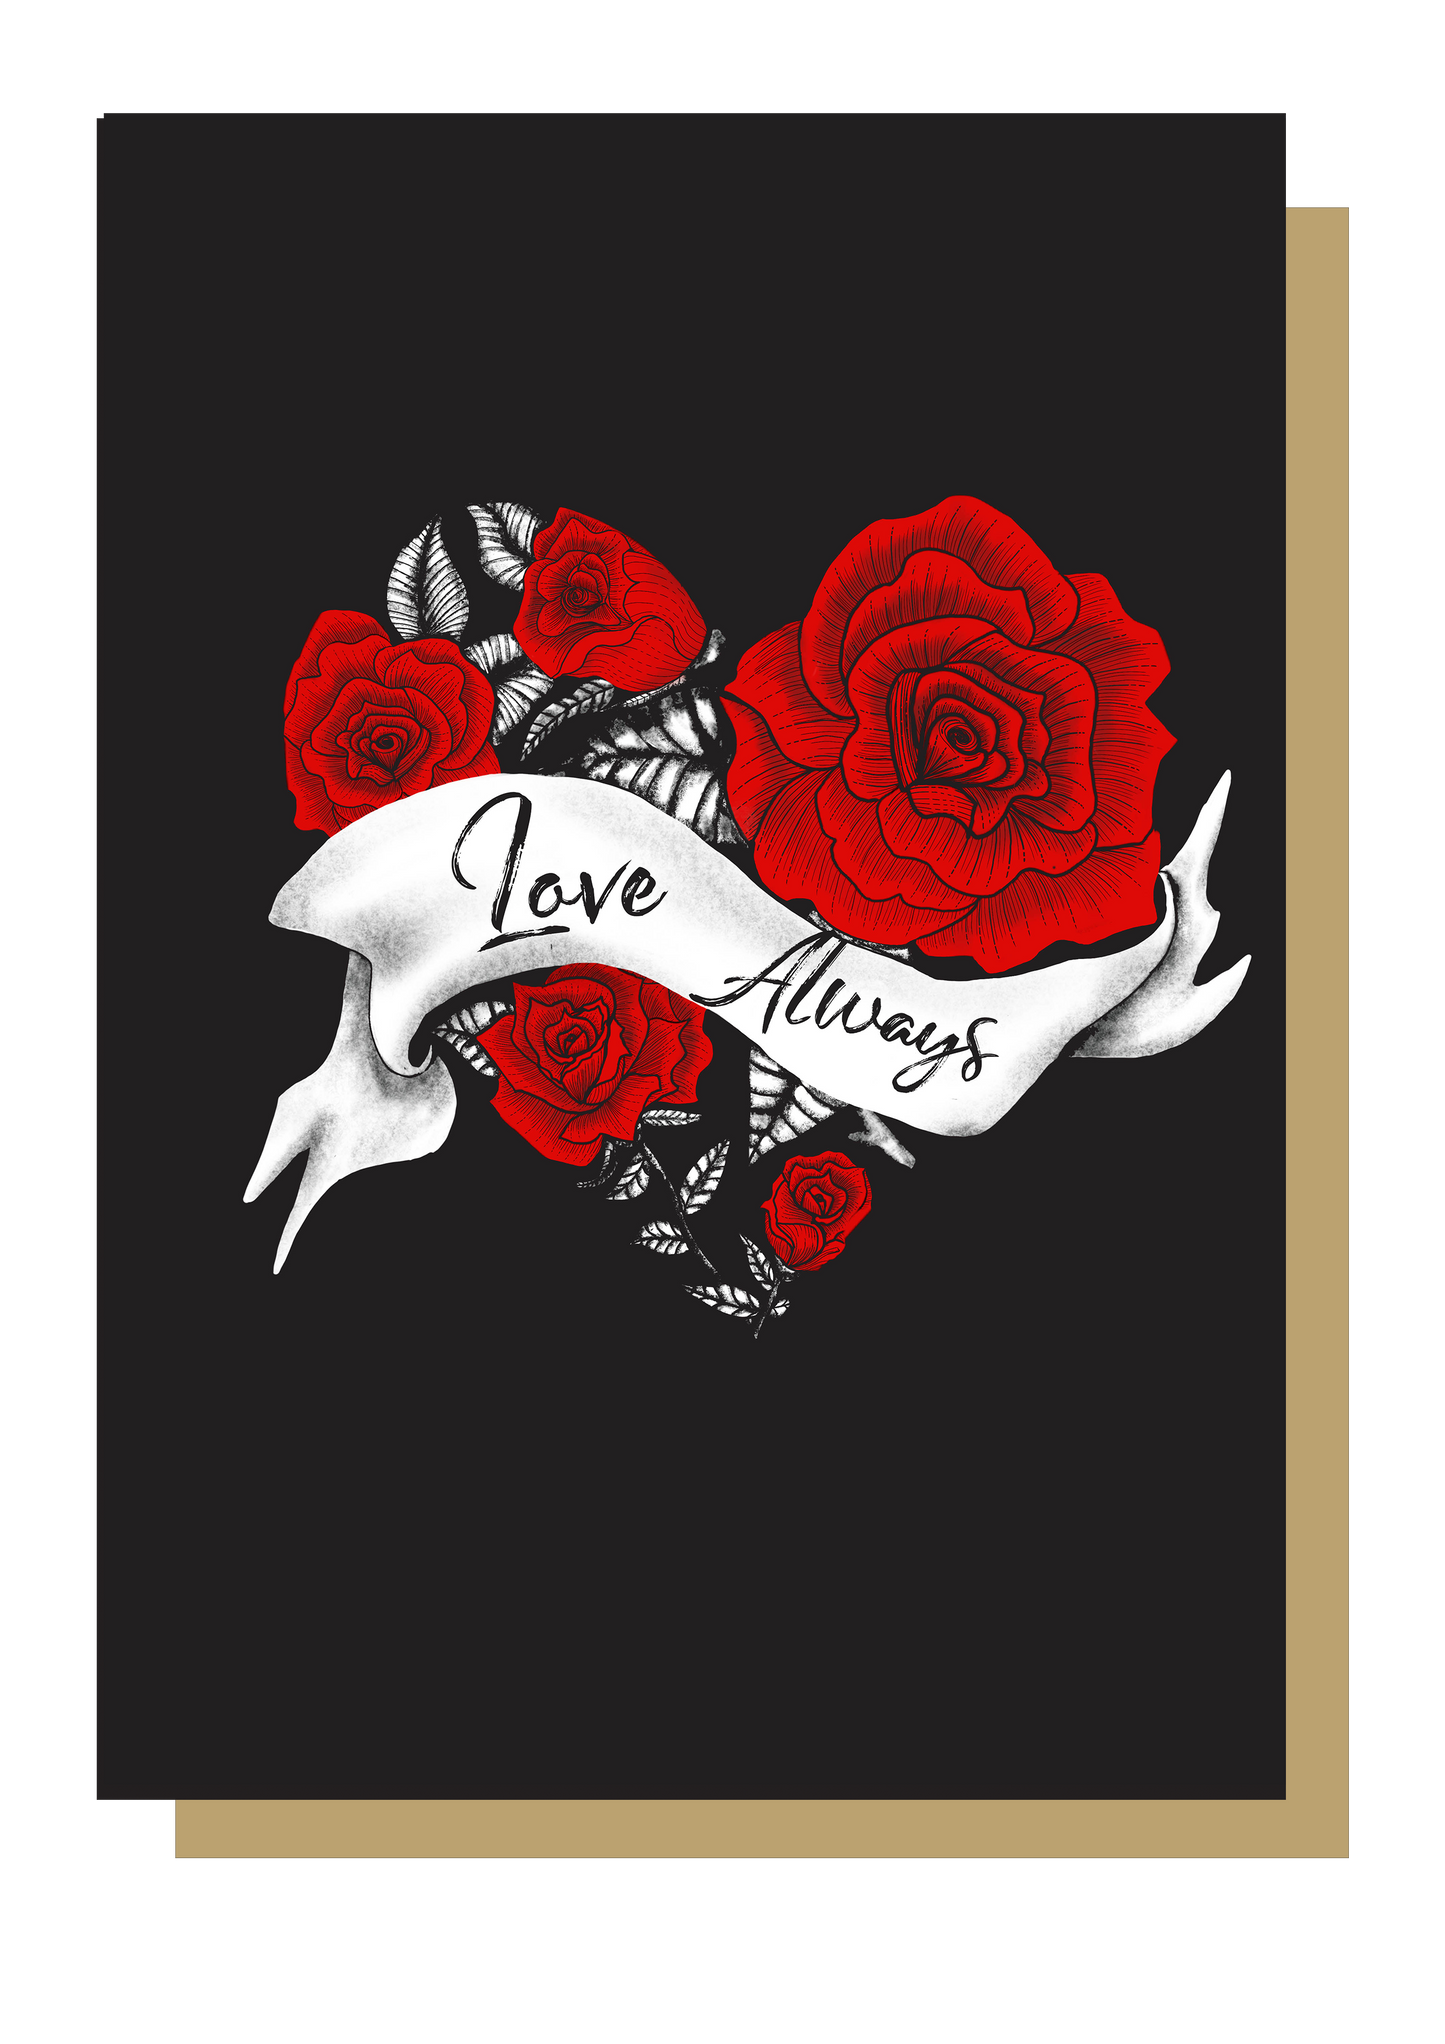 Love Always Heart and Roses Tattoo, Romantic Card